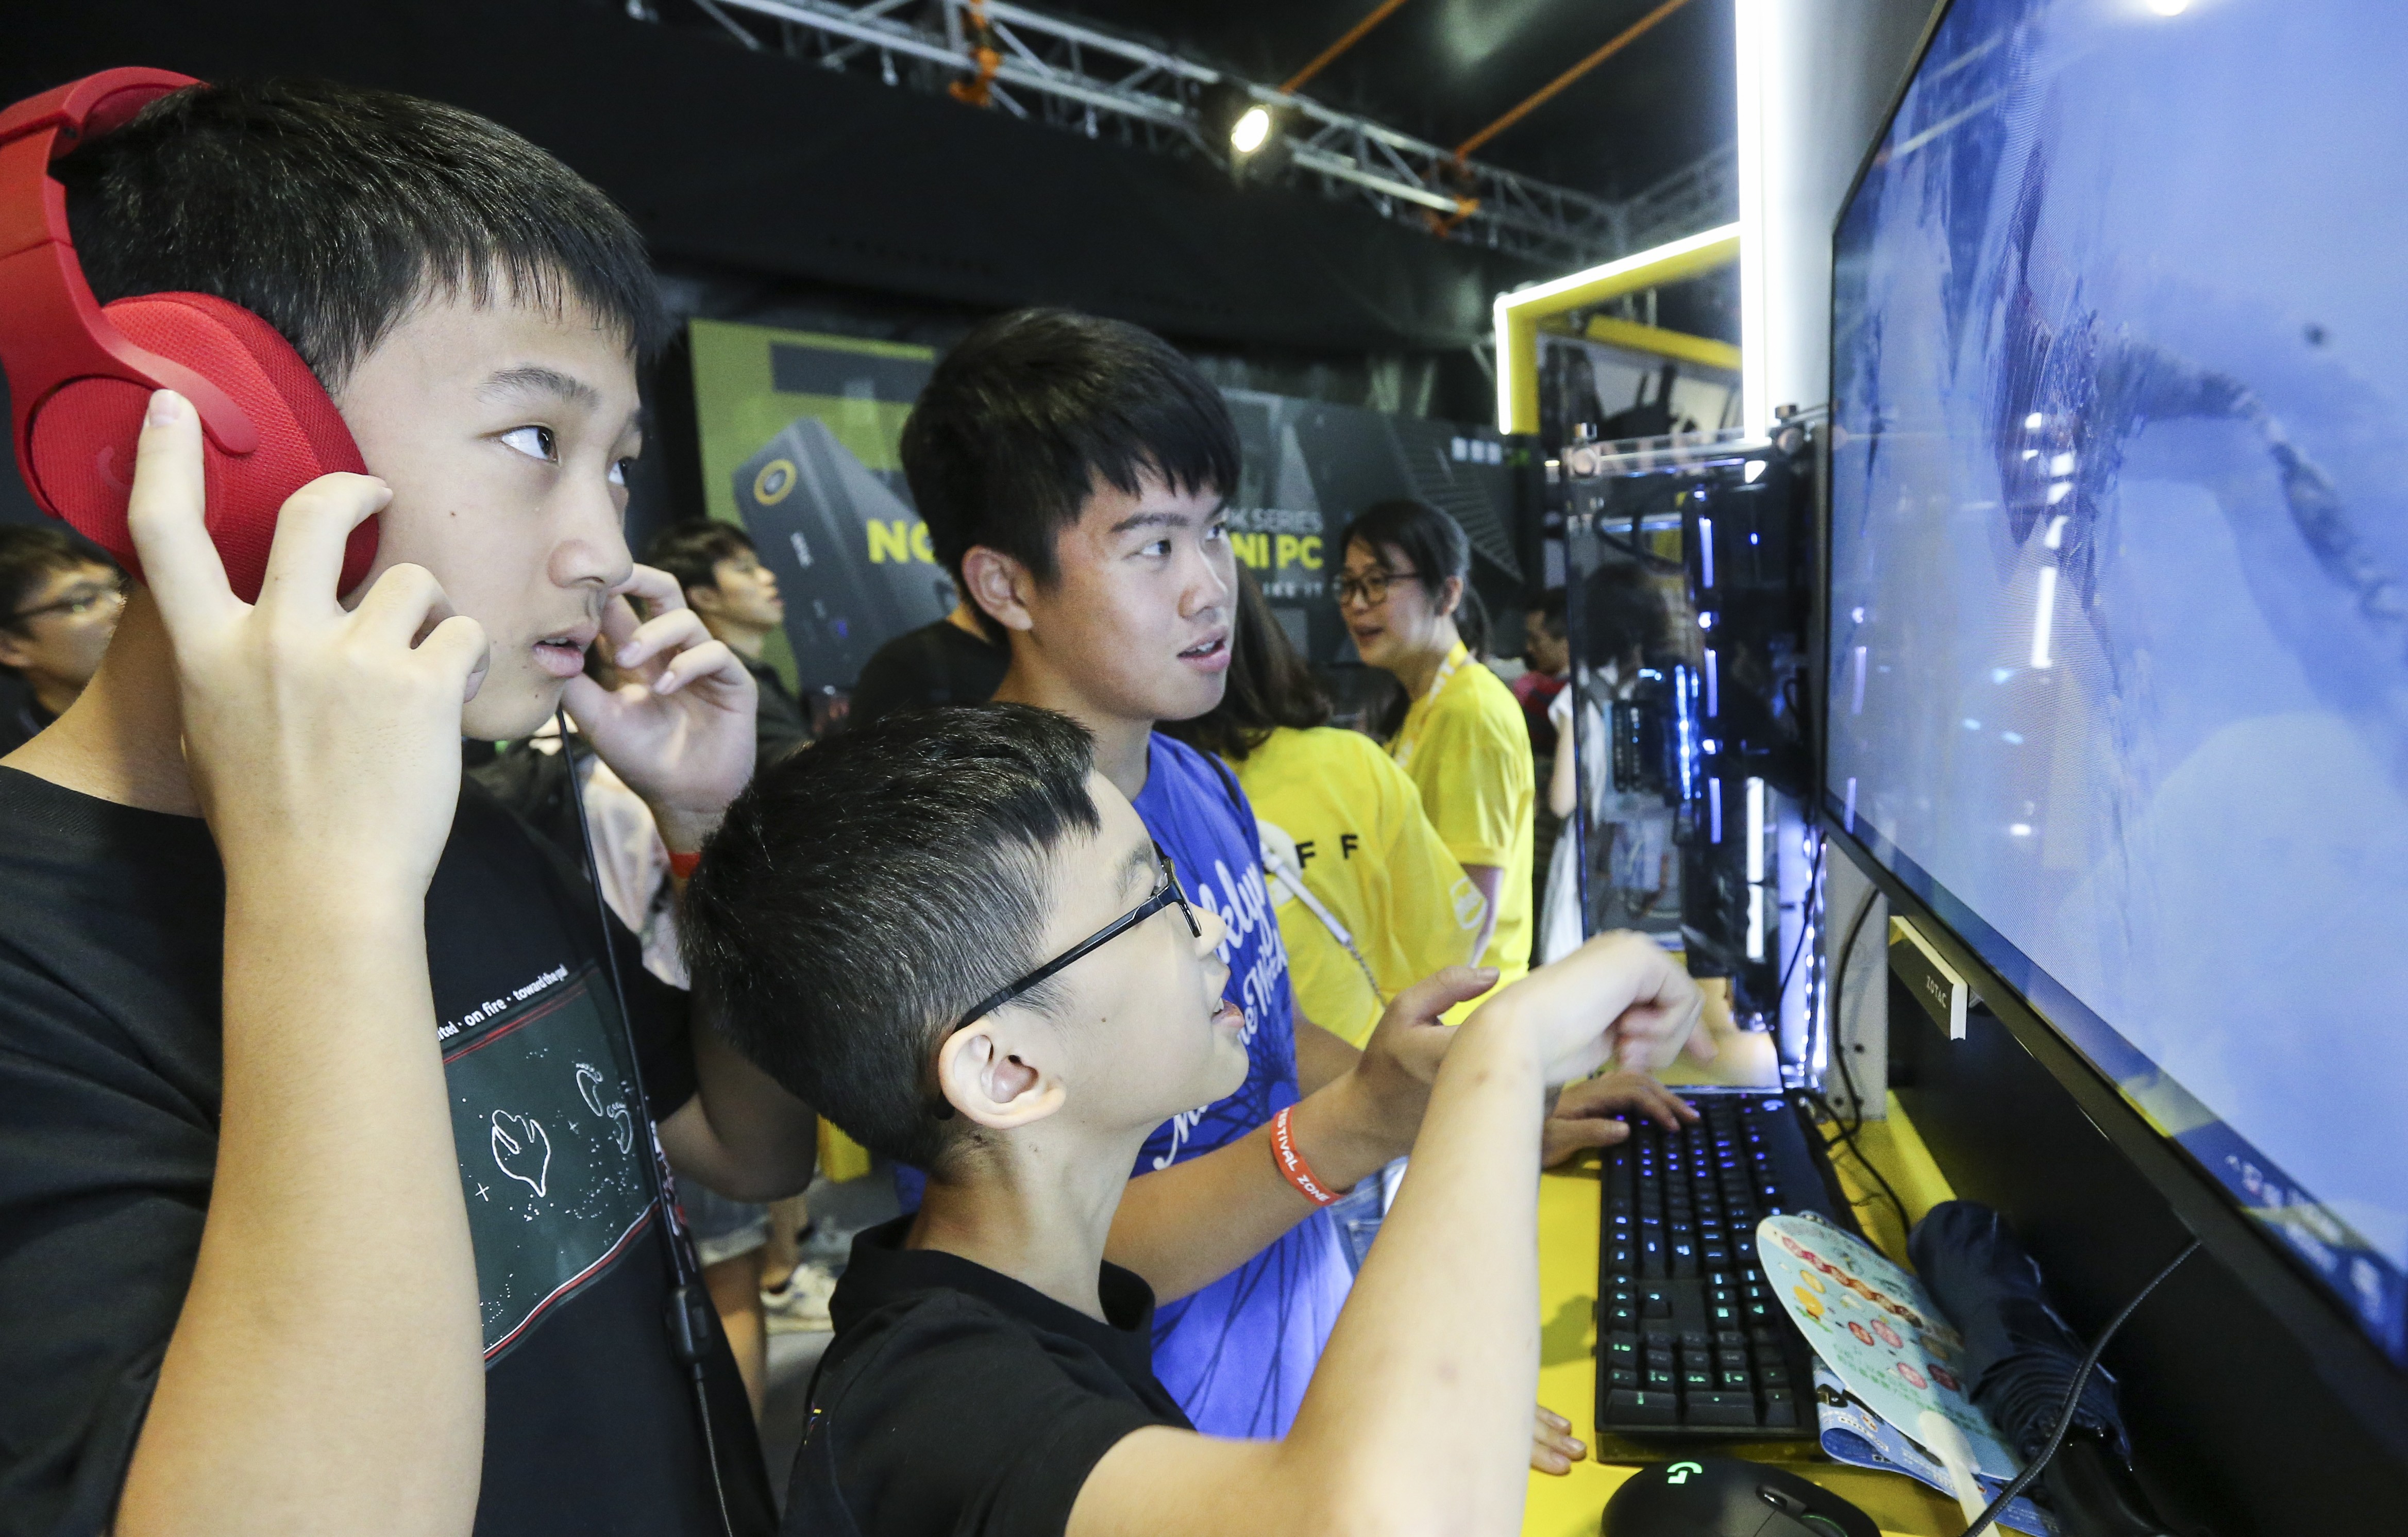 Education is needed on e-sports, academics say. Photo: Dickson Lee